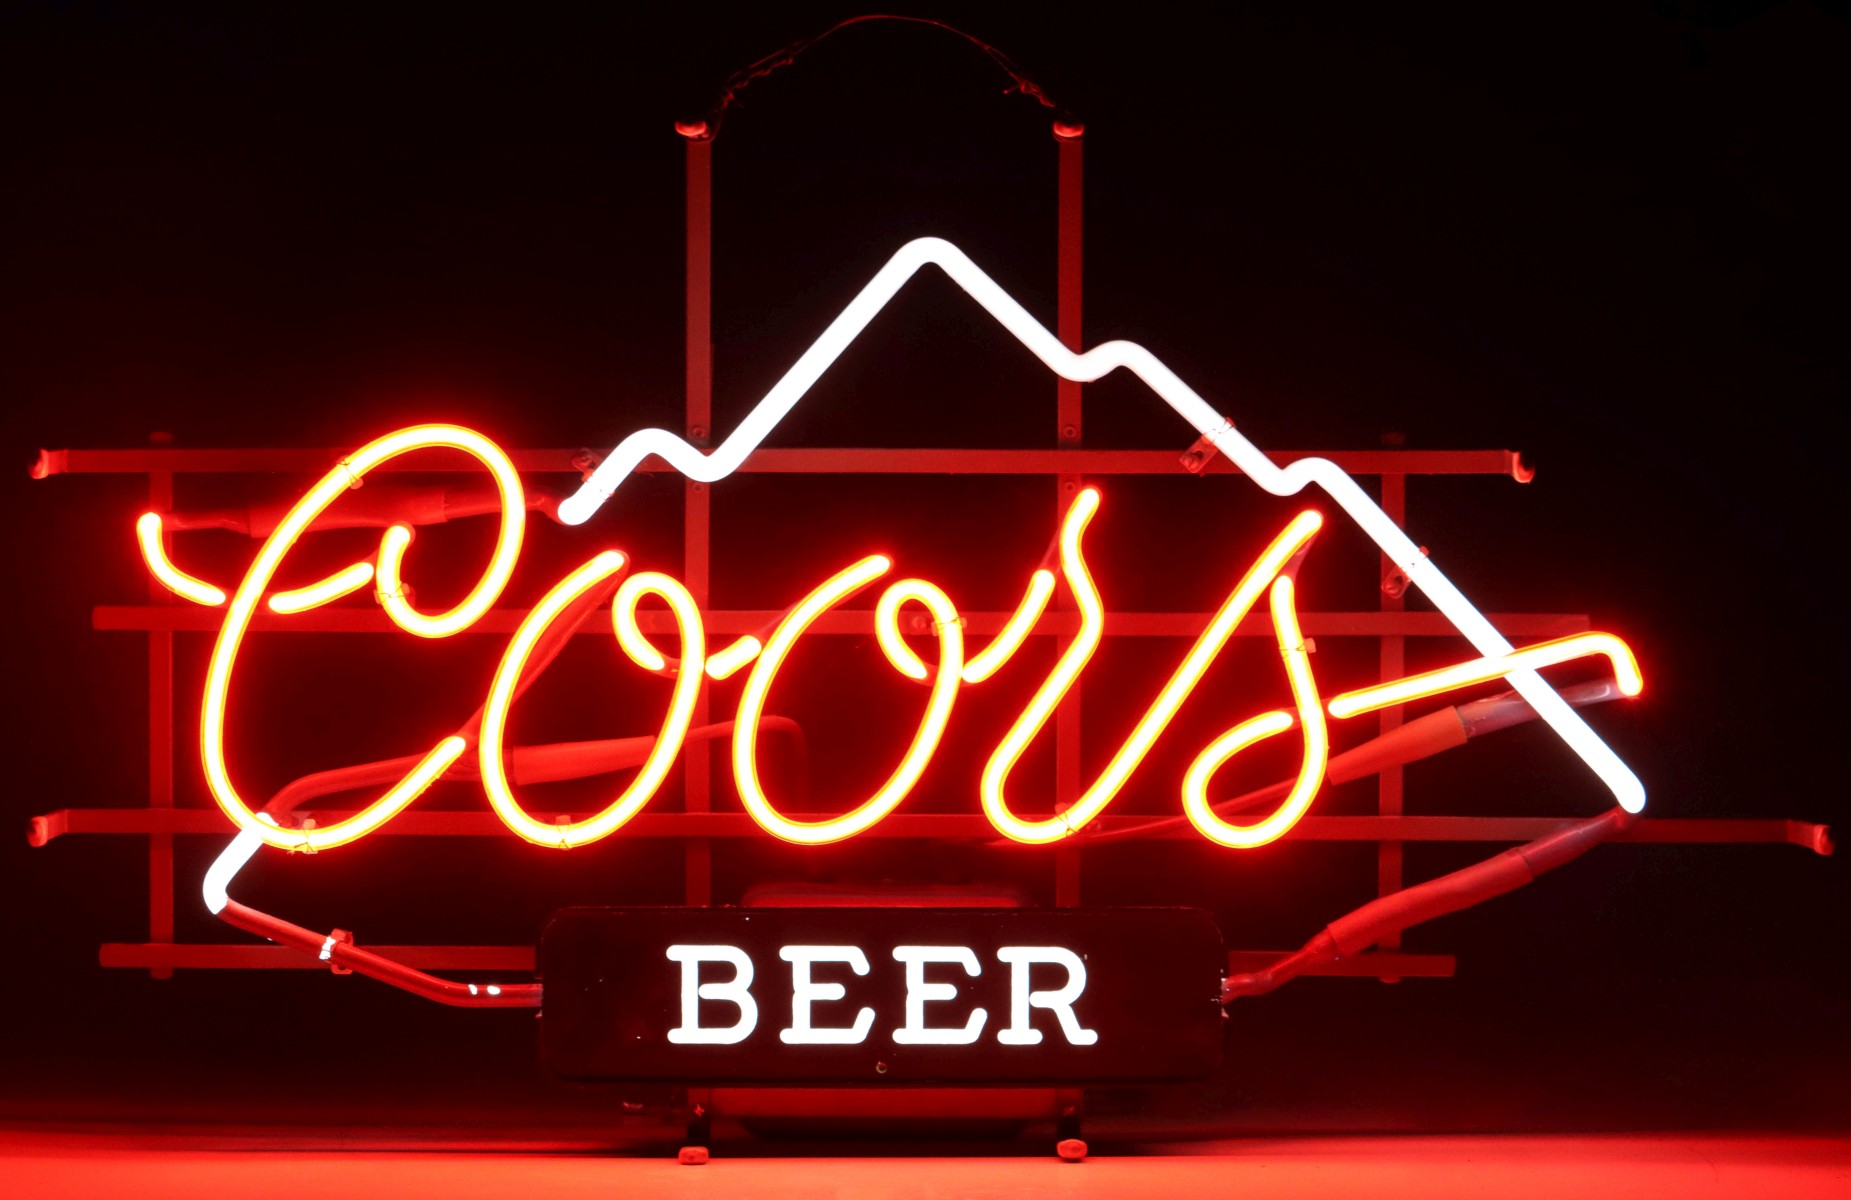 A COORS BEER NEON ADVERTISING SIGN